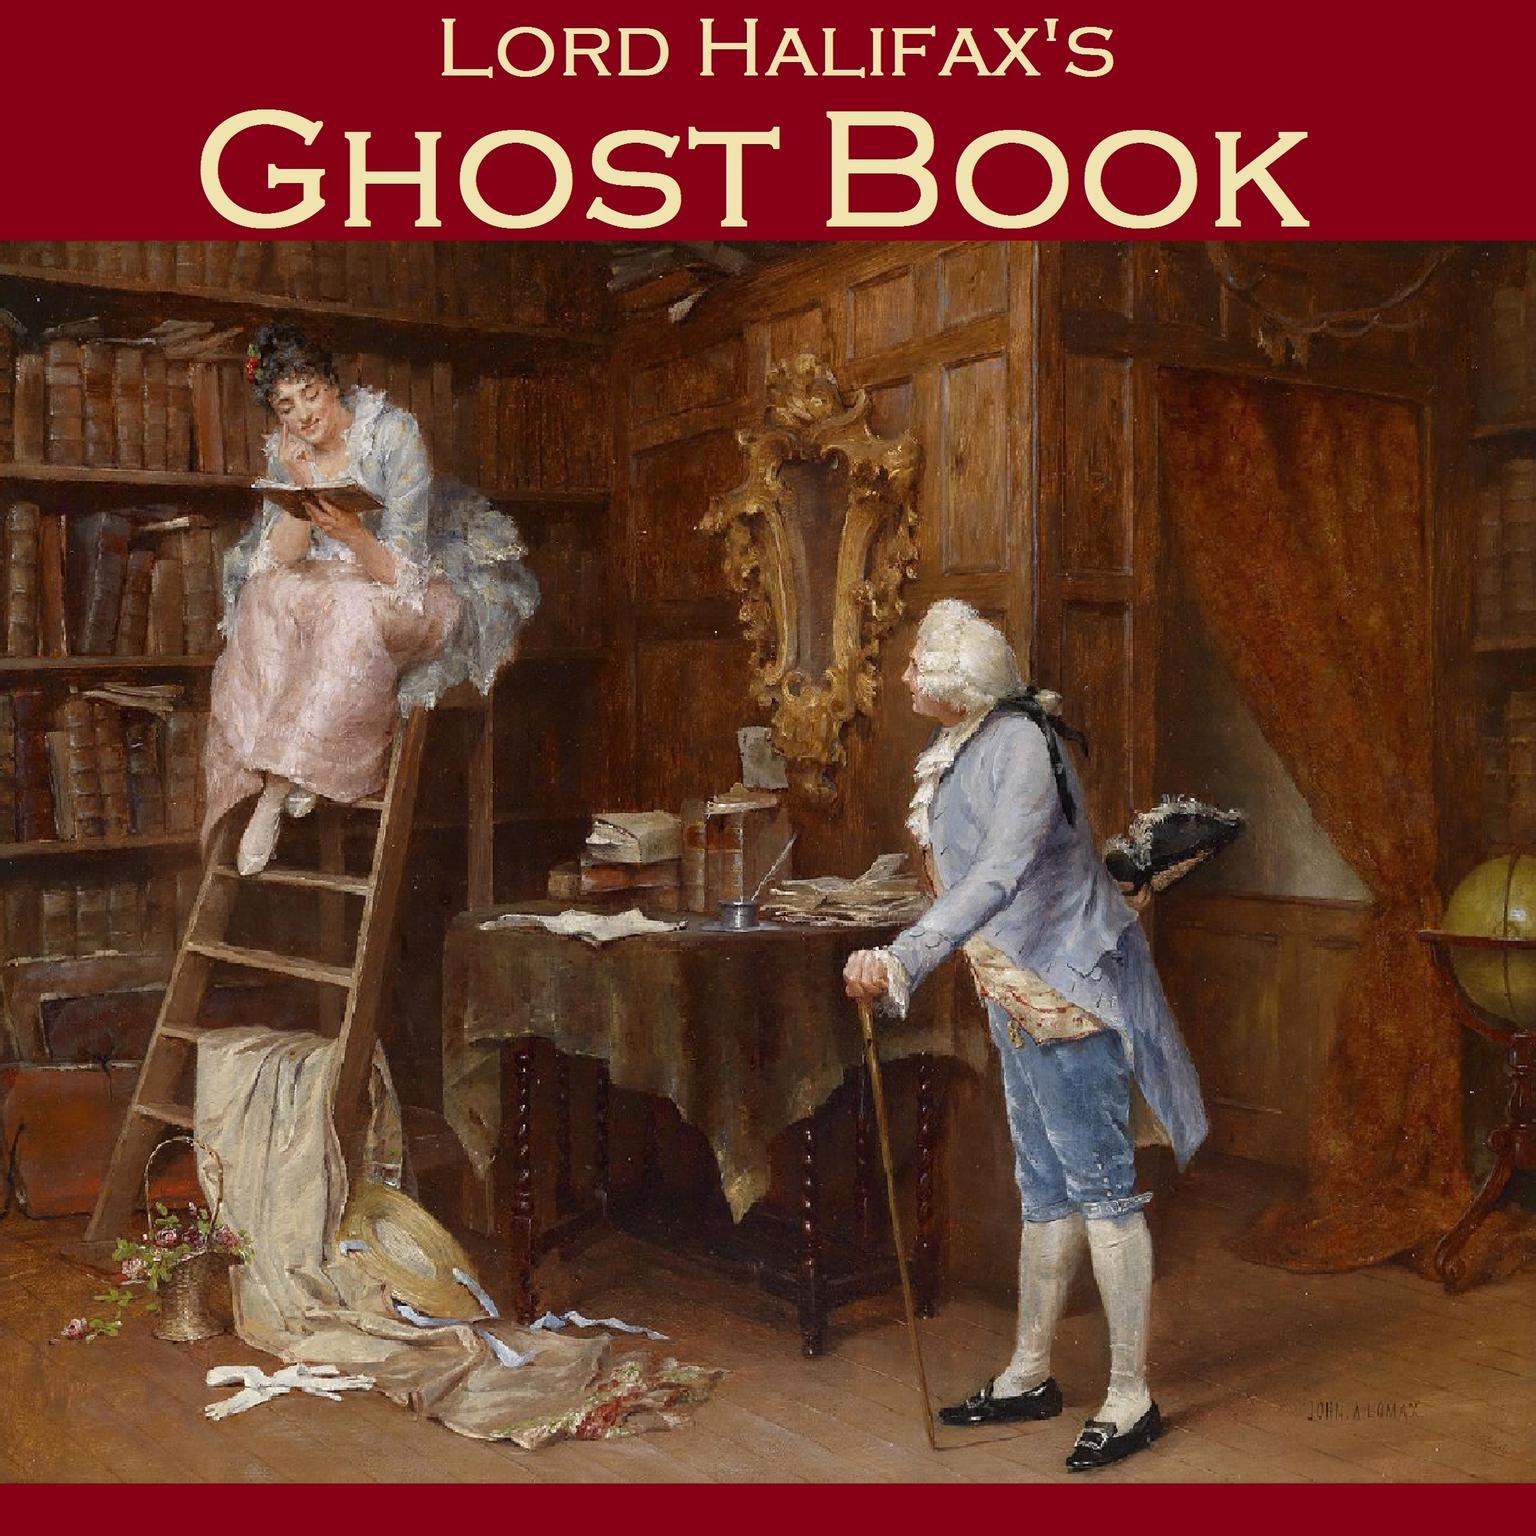 Lord Halifax’s Ghost Book: The Two Books Complete in One Volume Audiobook, by Charles Wood